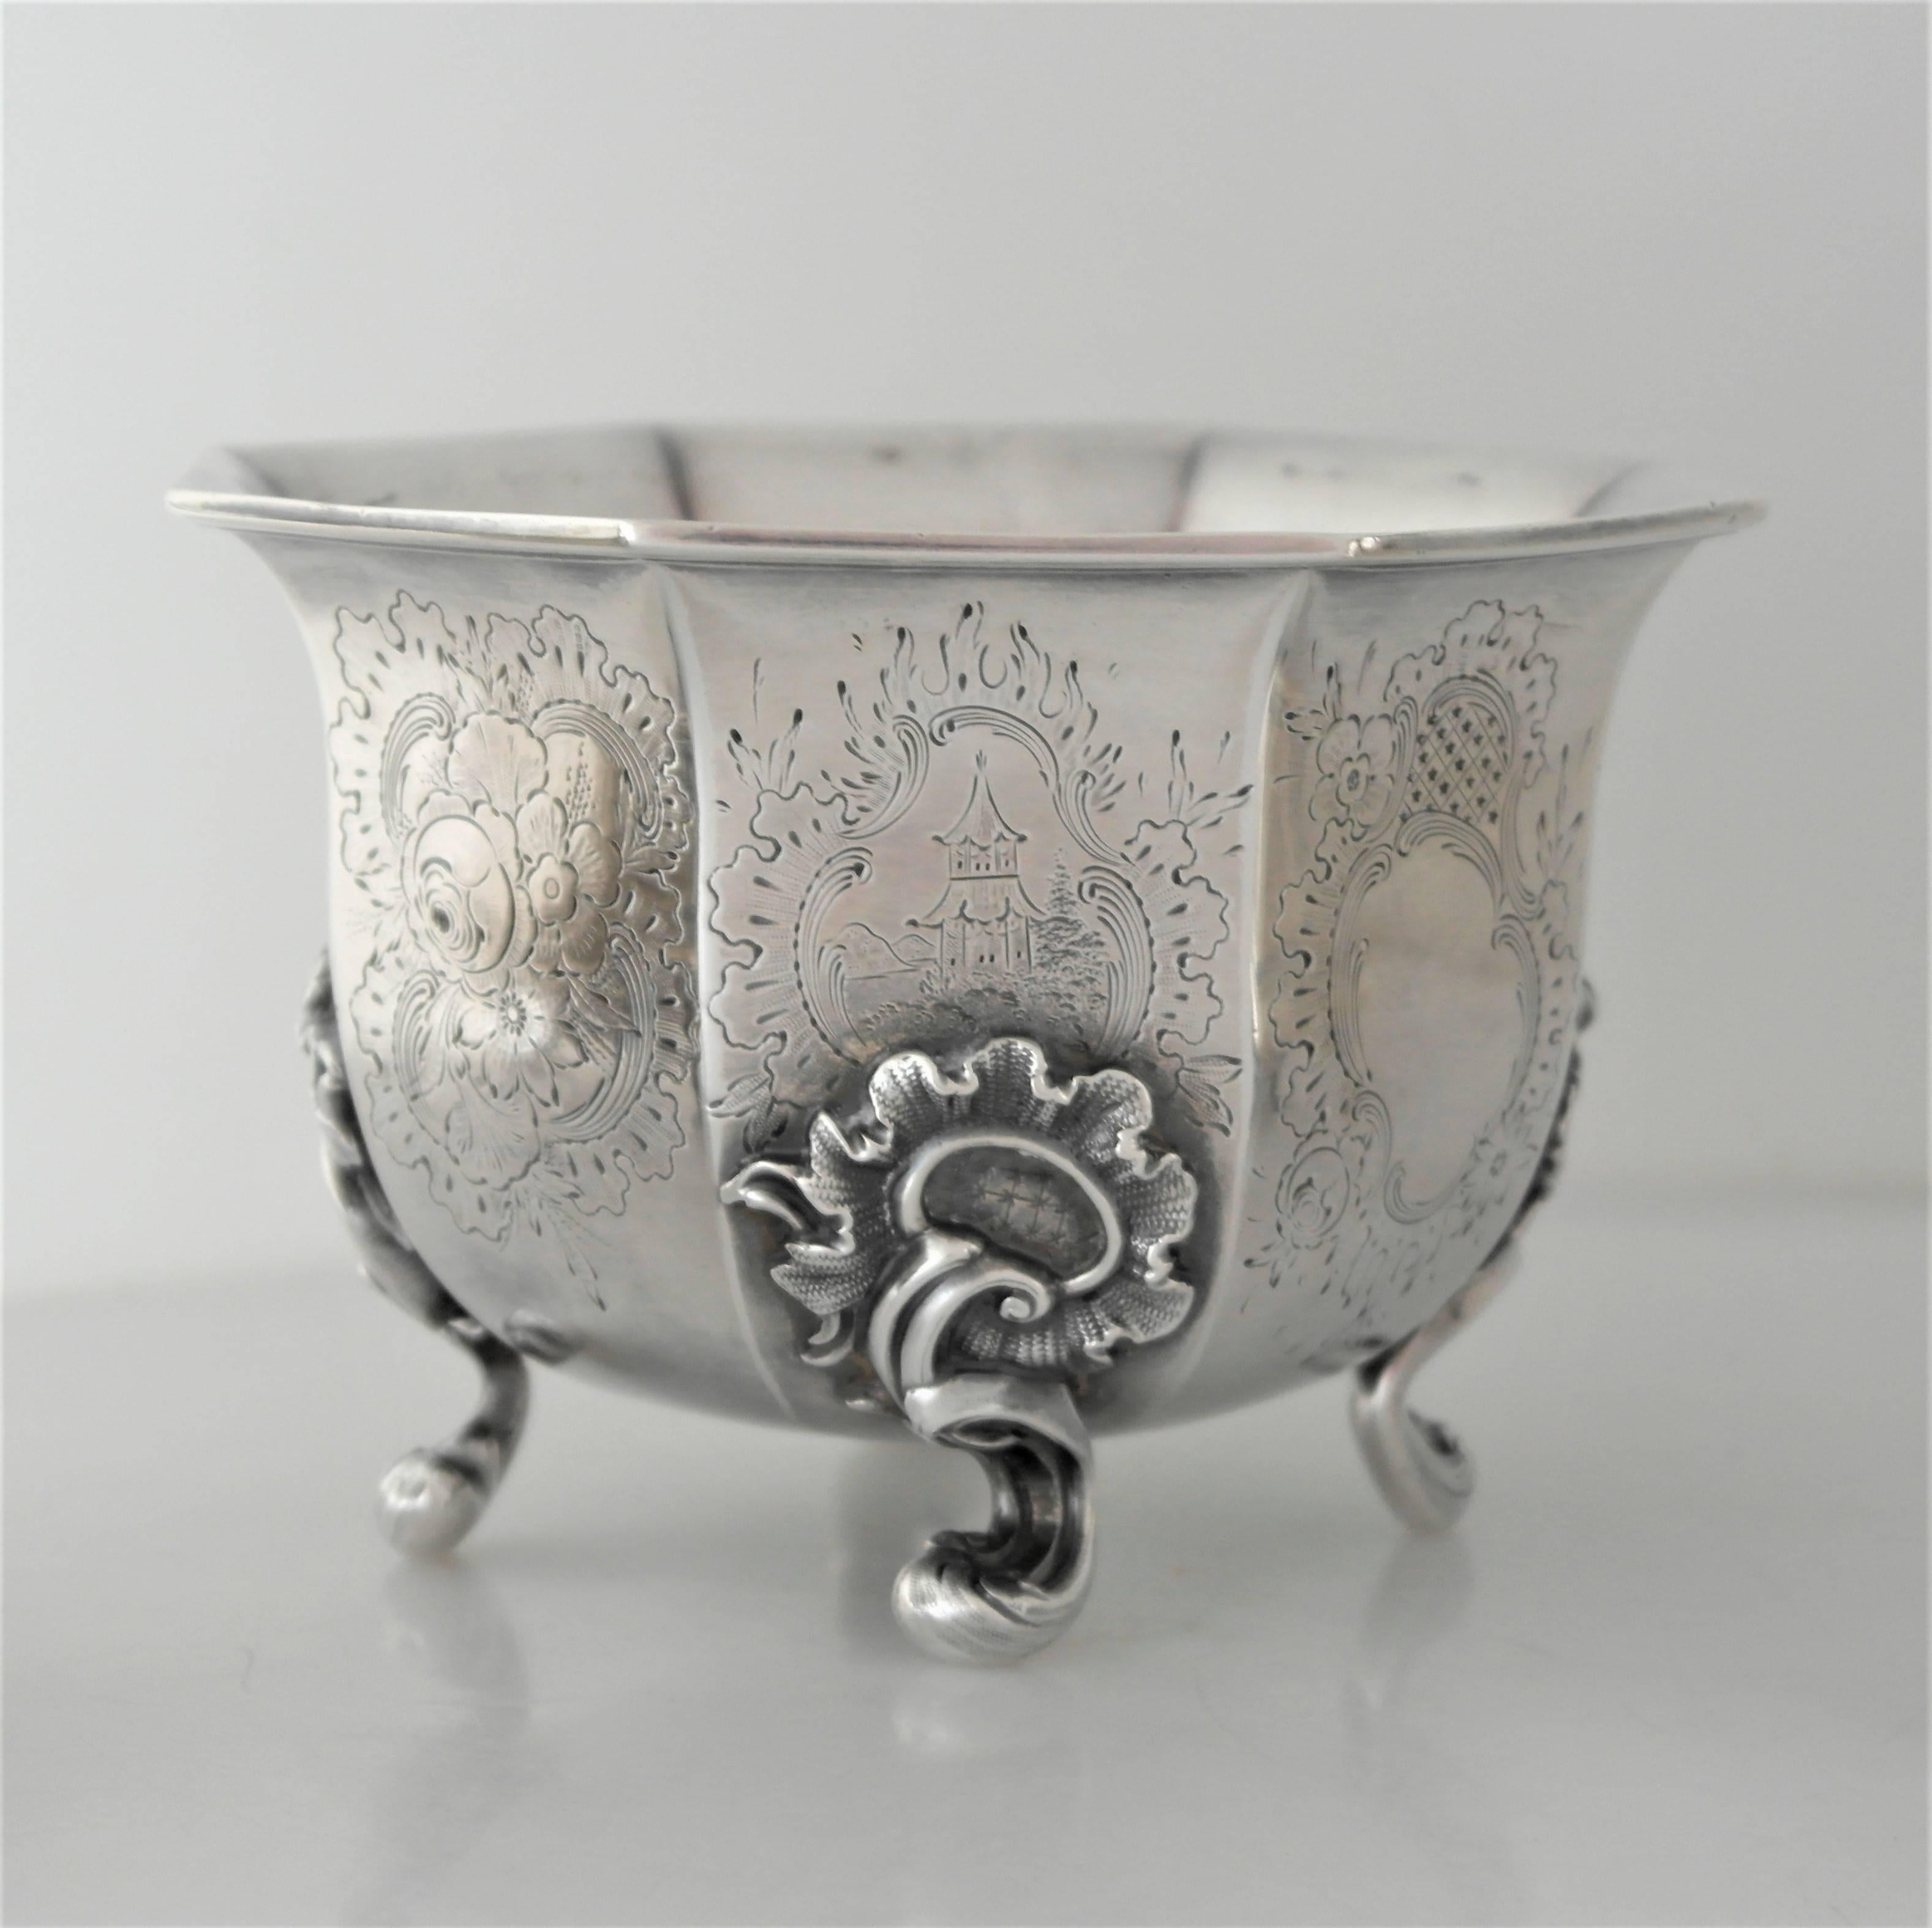 RARE, MUSEUM QUALITY Chinoiserie Coffe Tea Set Moore TIFFANY Coin Silver, 1845 For Sale 3